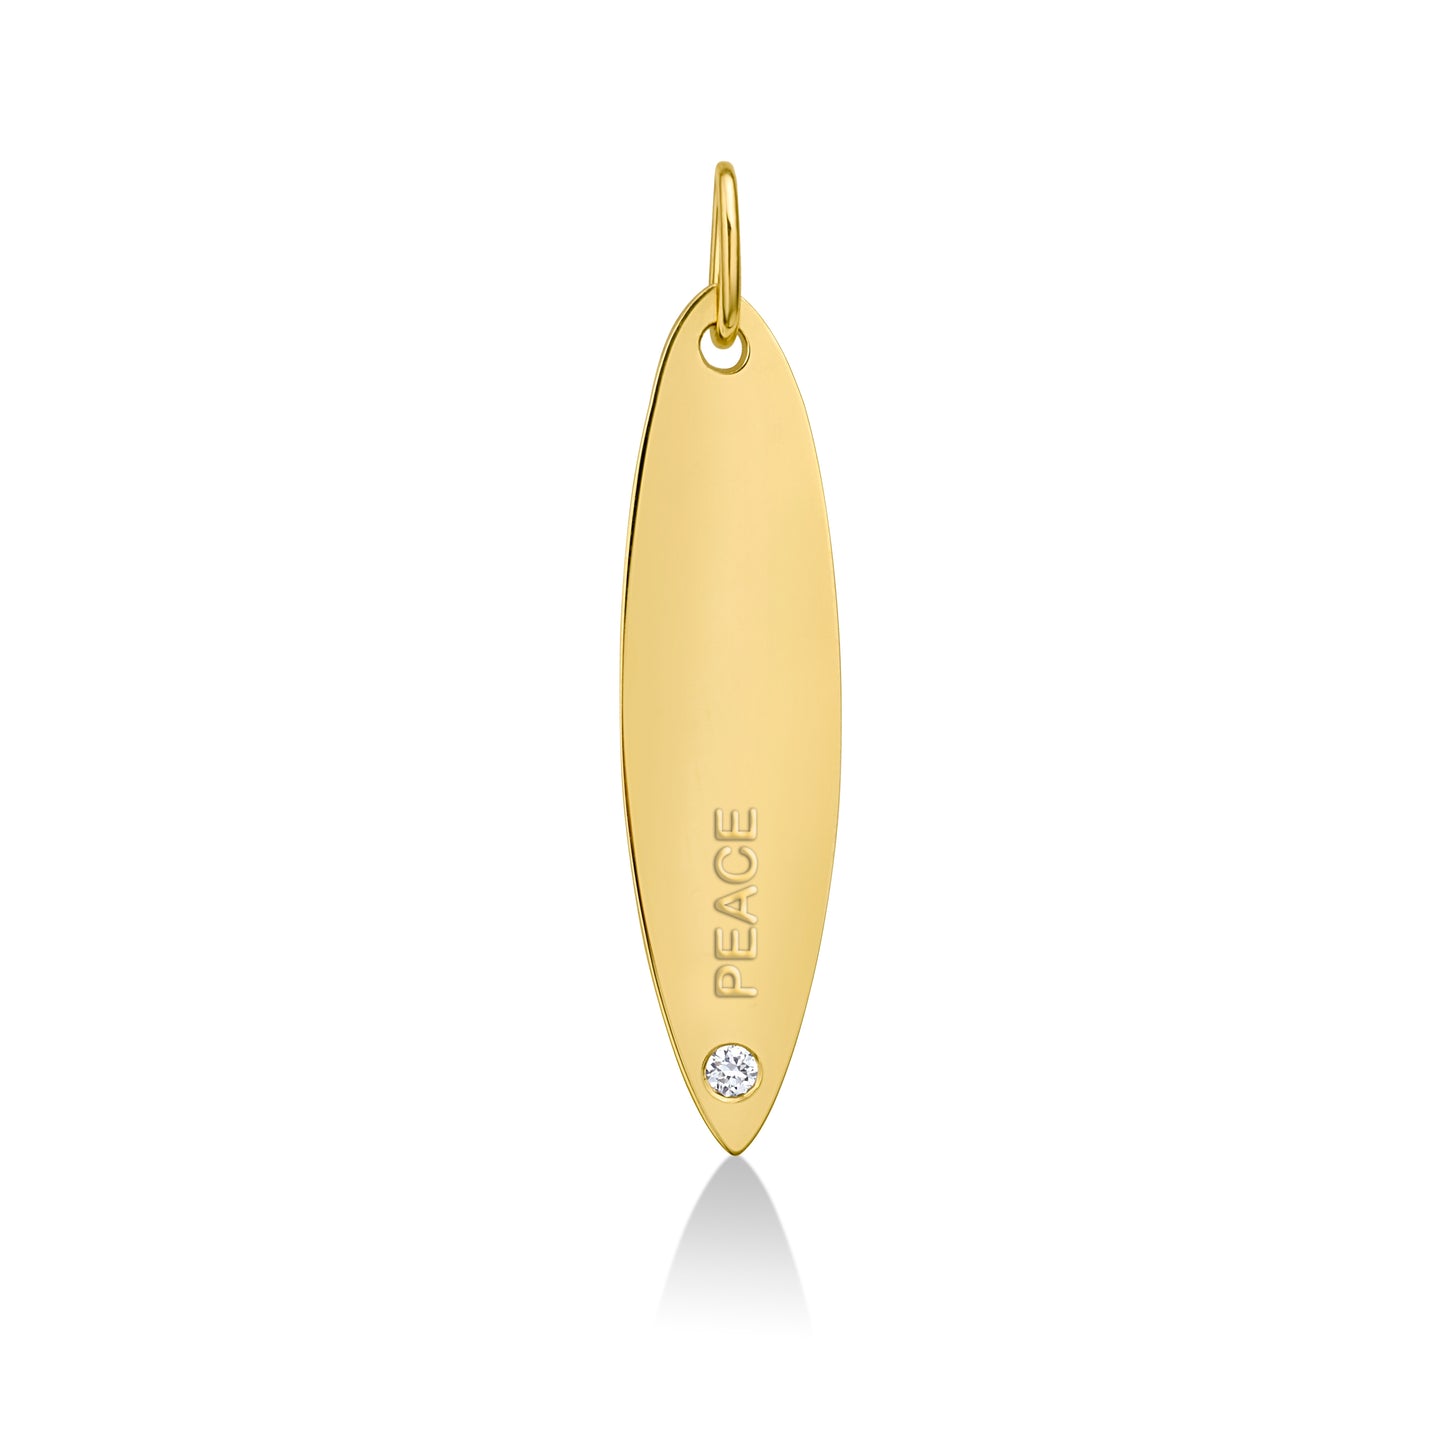 14k gold surfboard charm lock with PEACE engraved and diamond